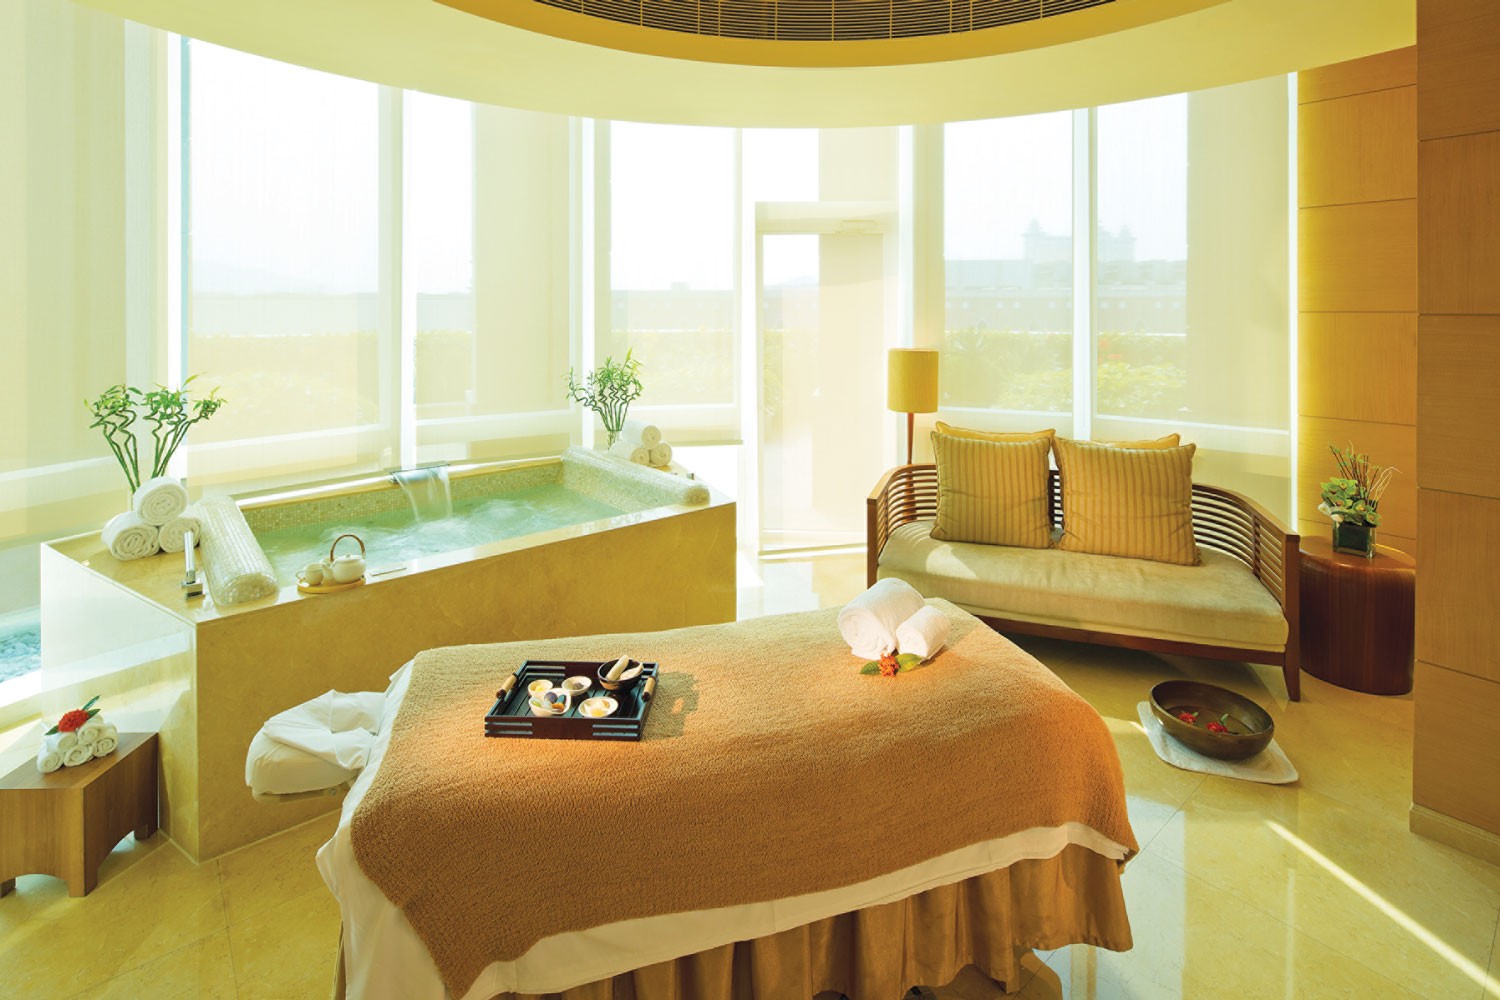 The Spa at Four Seasons Macao - “Portugal with Love” 